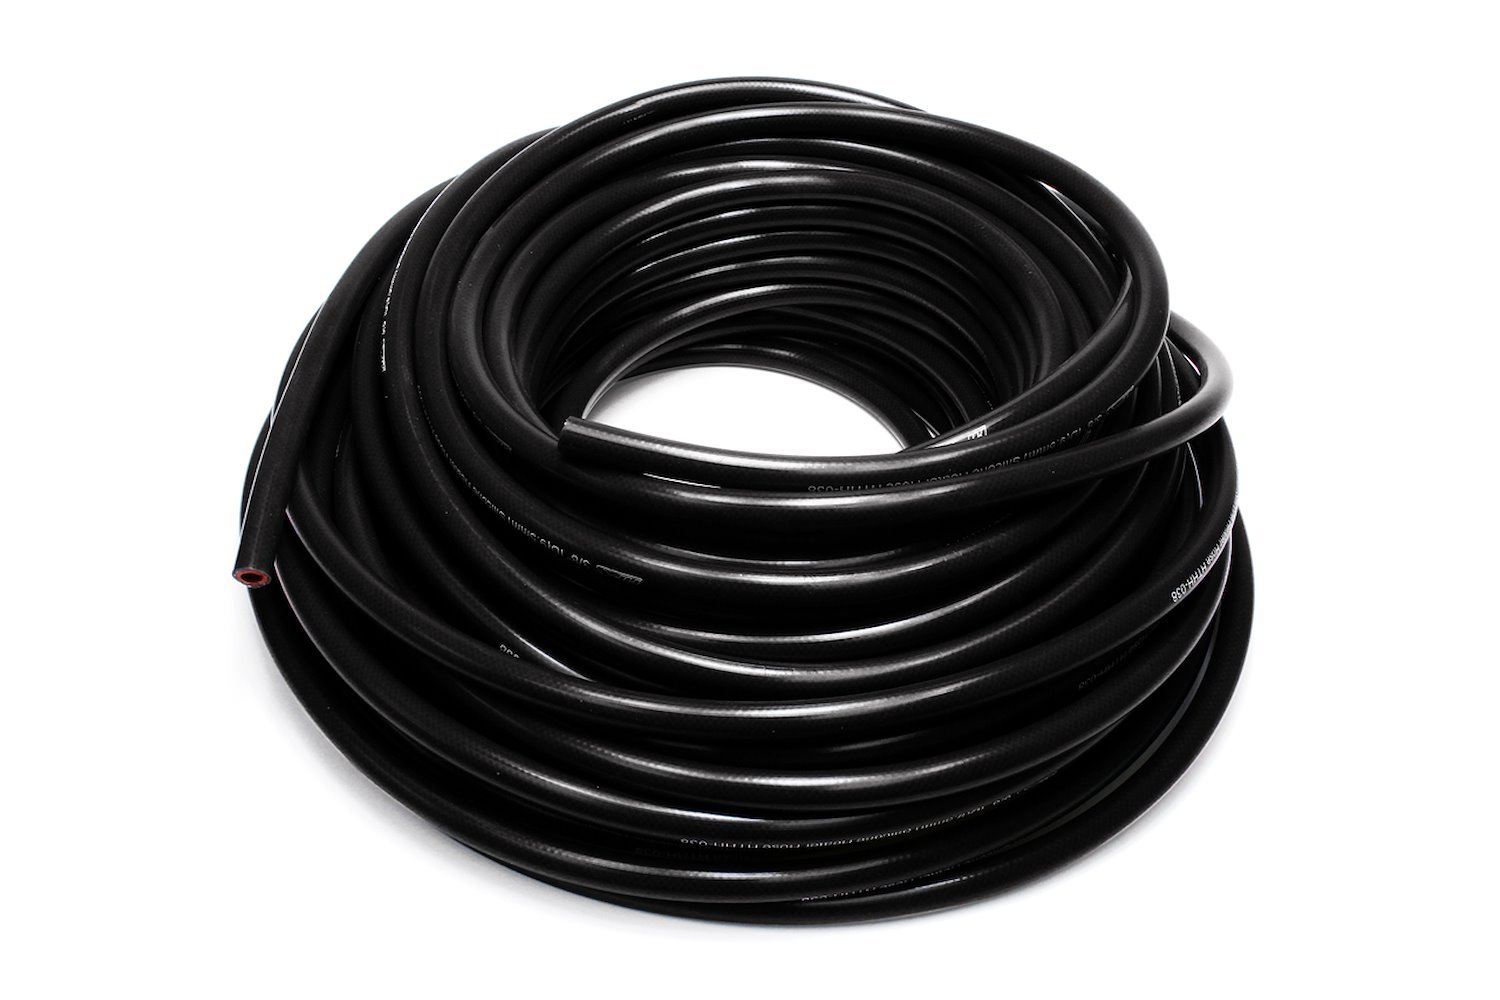 HTHH-032-BLKx100 Silicone Heater Hose Tubing, High-Temp Reinforced, 5/16 in. ID, 100 ft. Roll, Black